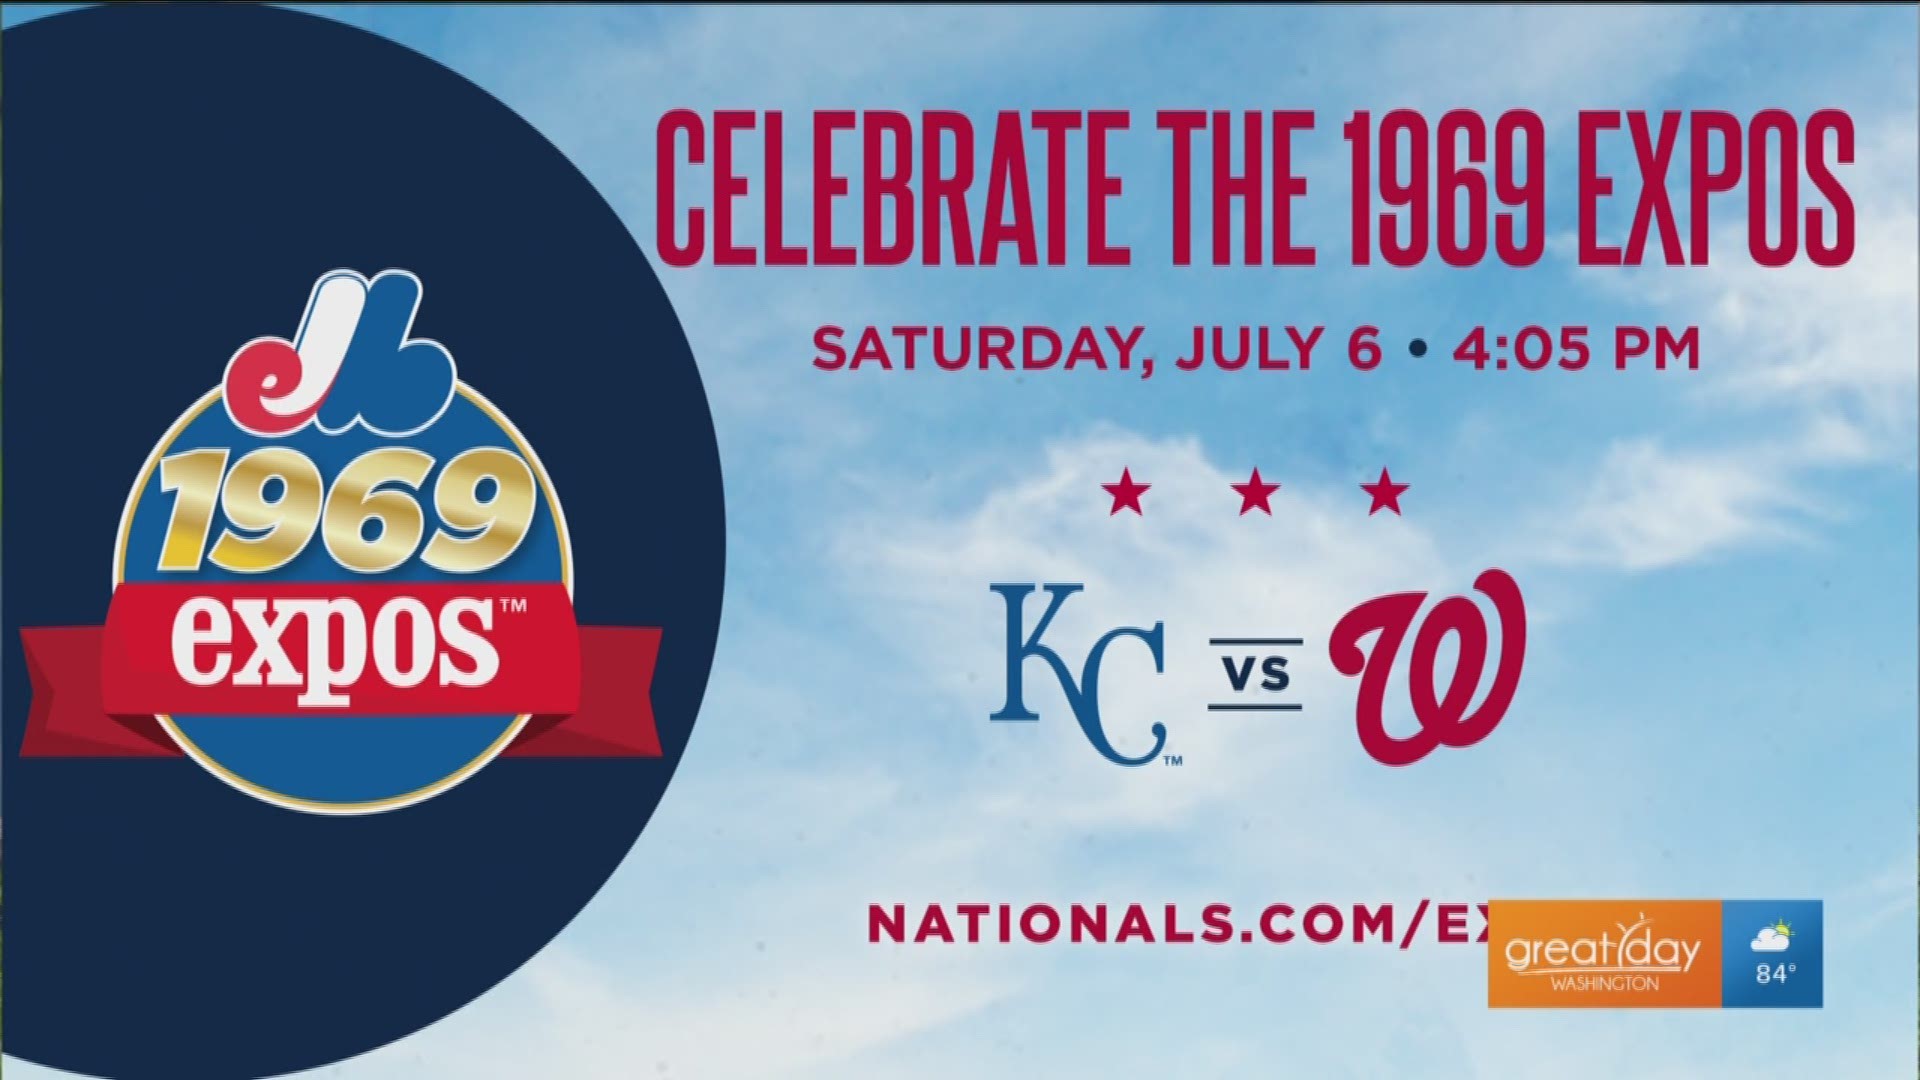 The Washington Nationals are hosting a variety of themed nights the Fourth of July Weekend including a throwback night where they will celebrate the Nationals' origin team, the Montreal Expos. To get tickets or to find more information, go to nationals.com/tickets